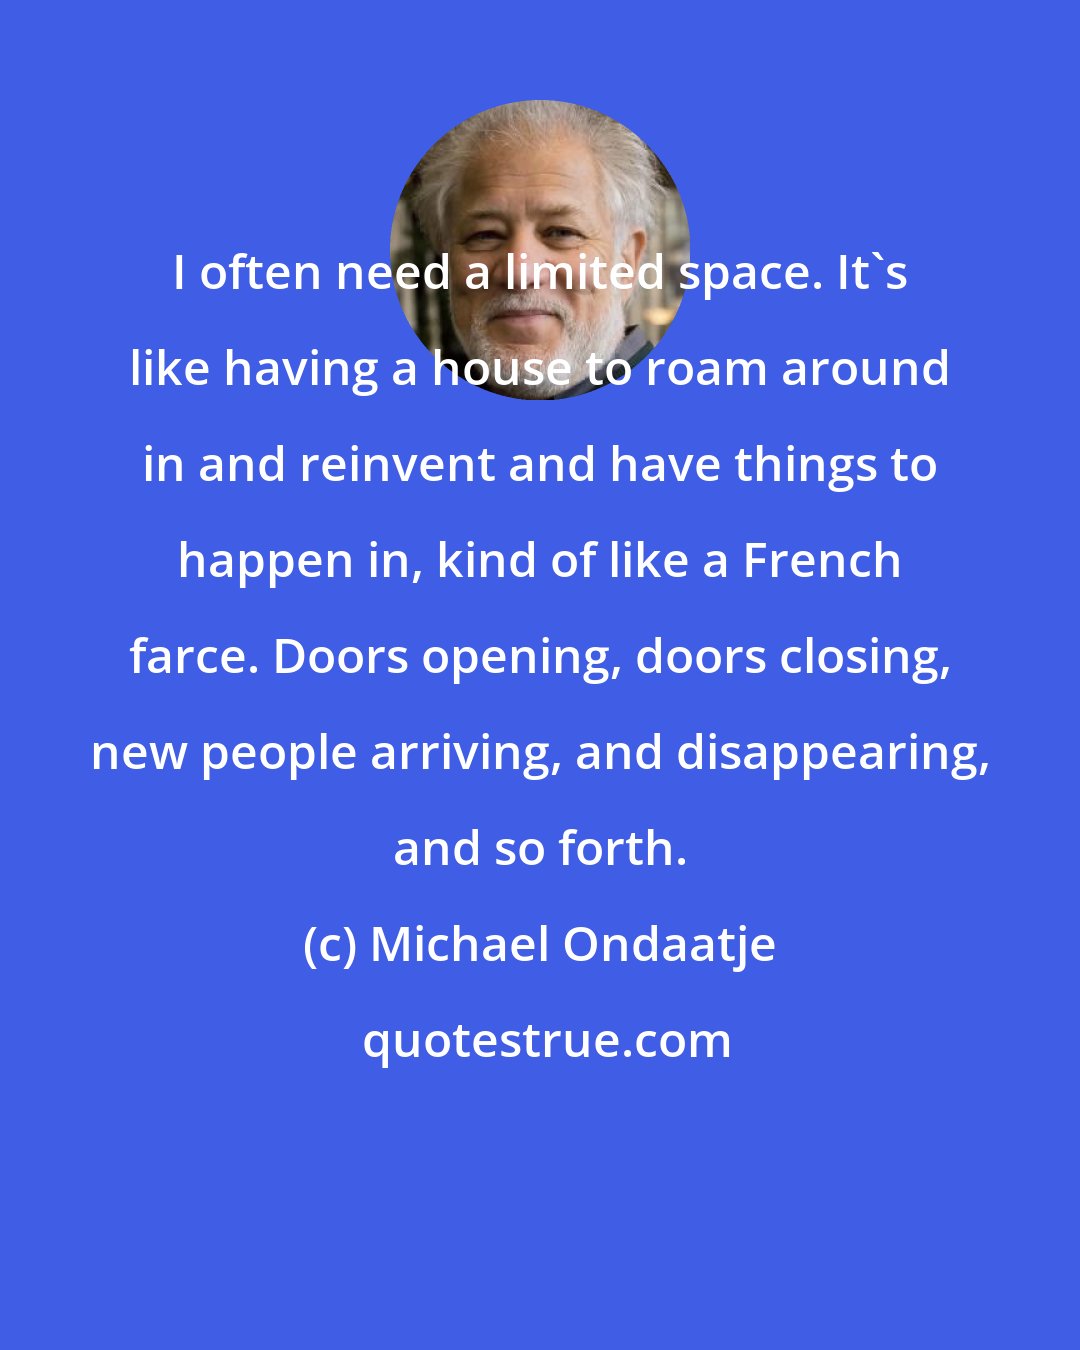 Michael Ondaatje: I often need a limited space. It's like having a house to roam around in and reinvent and have things to happen in, kind of like a French farce. Doors opening, doors closing, new people arriving, and disappearing, and so forth.